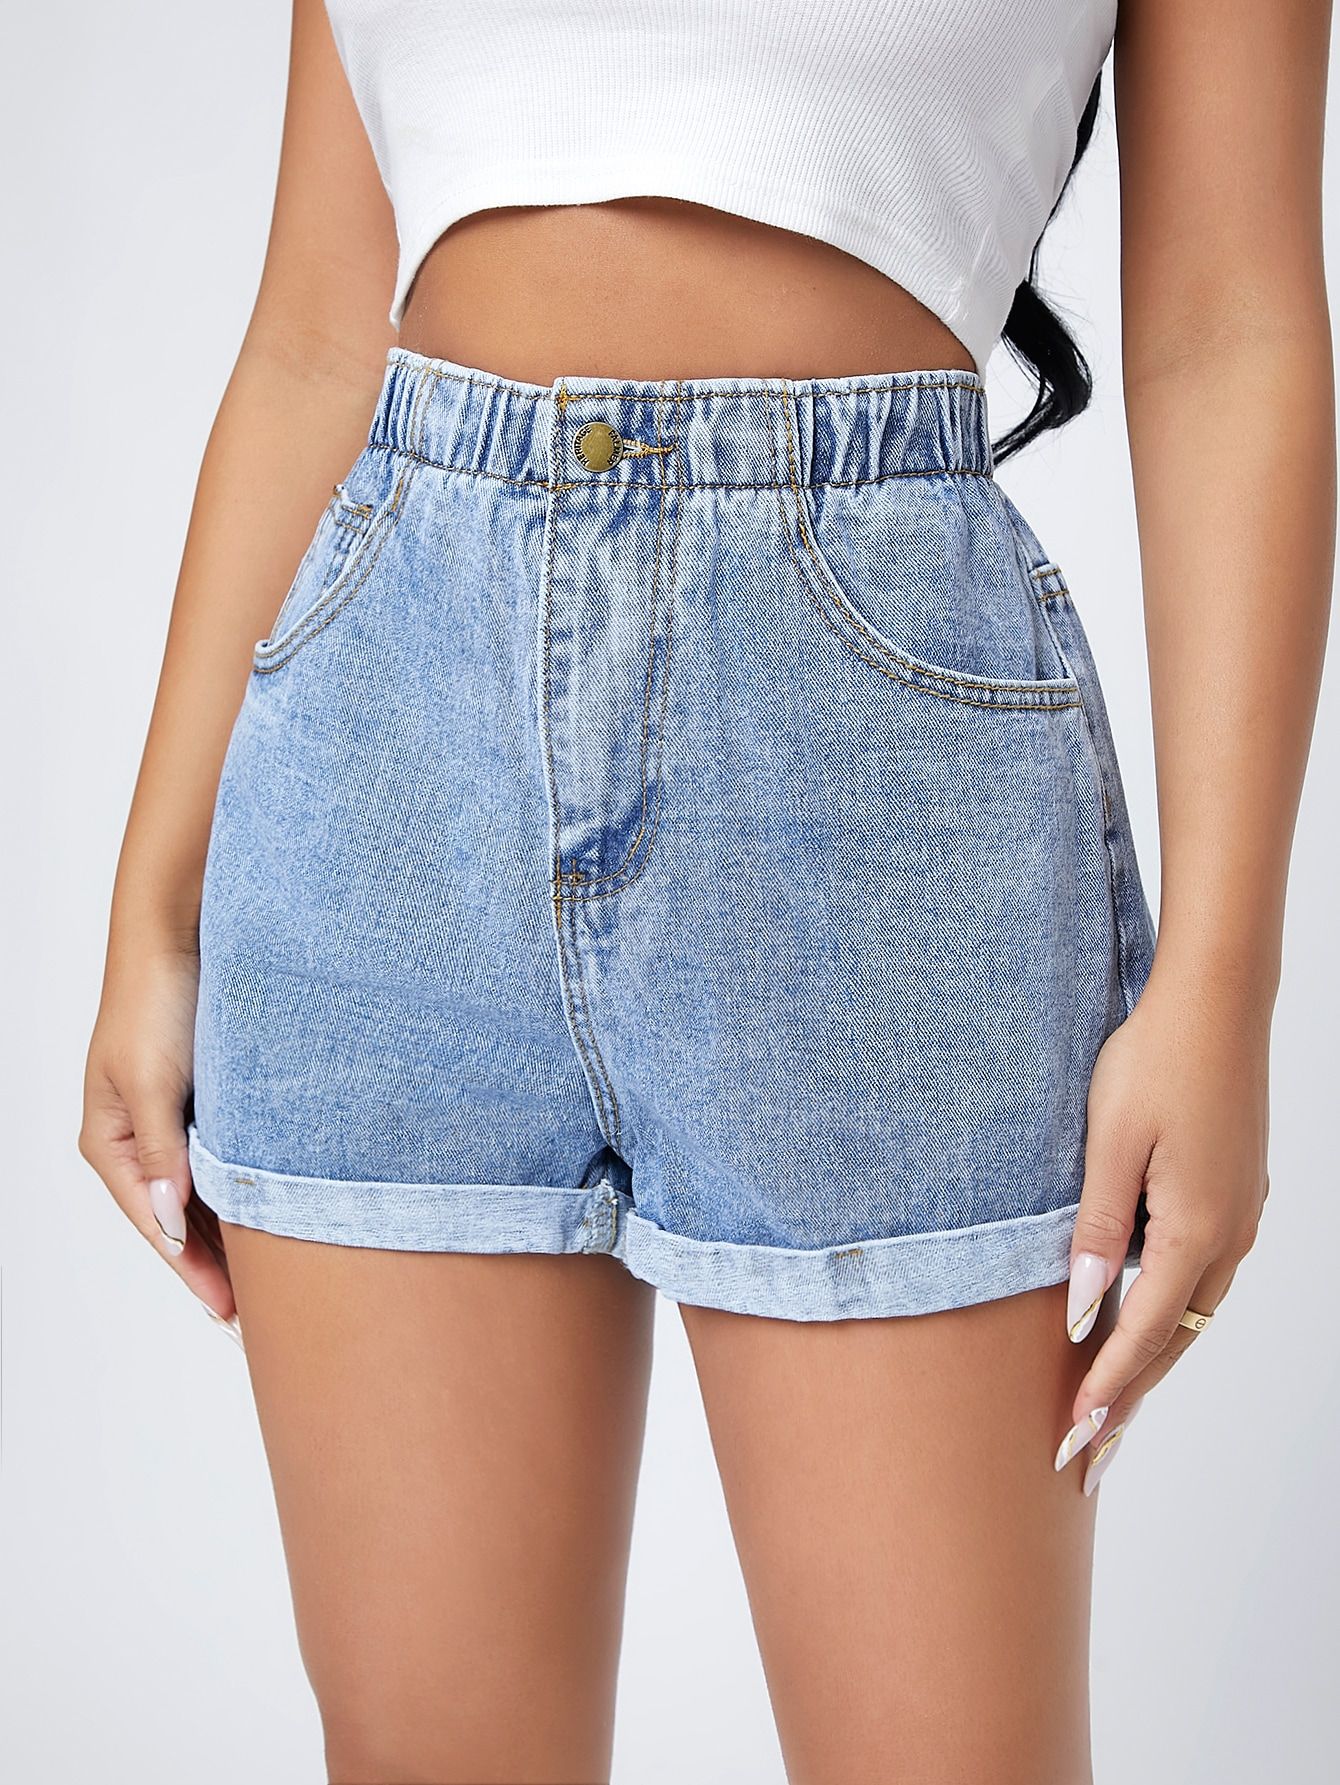 Top 15 High Waisted Jean Shorts Outfit Ideas for Women